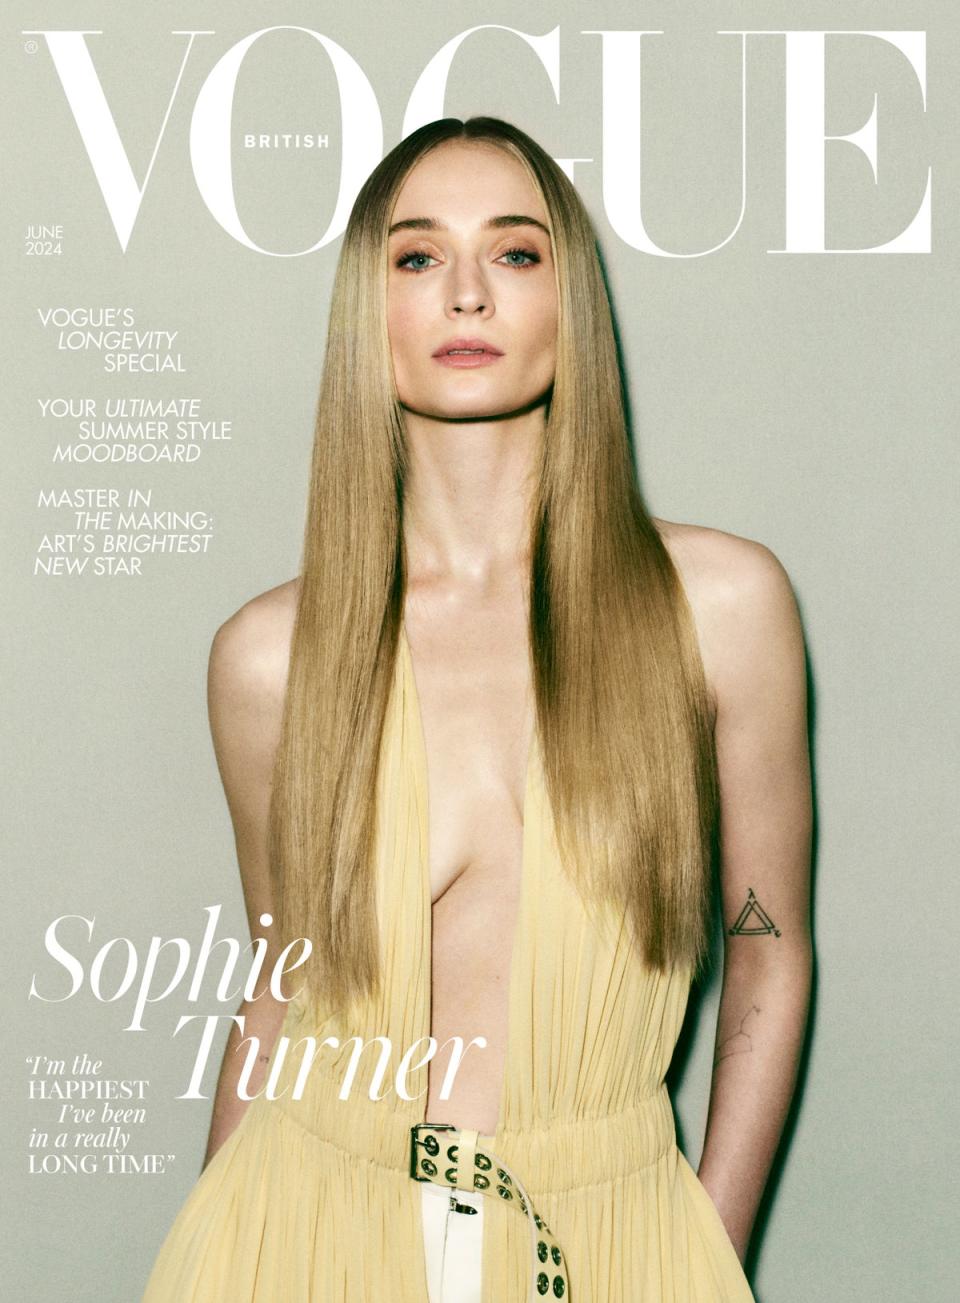 Turner graces the cover of British Vogue’s June issue (Mikael Jansson)